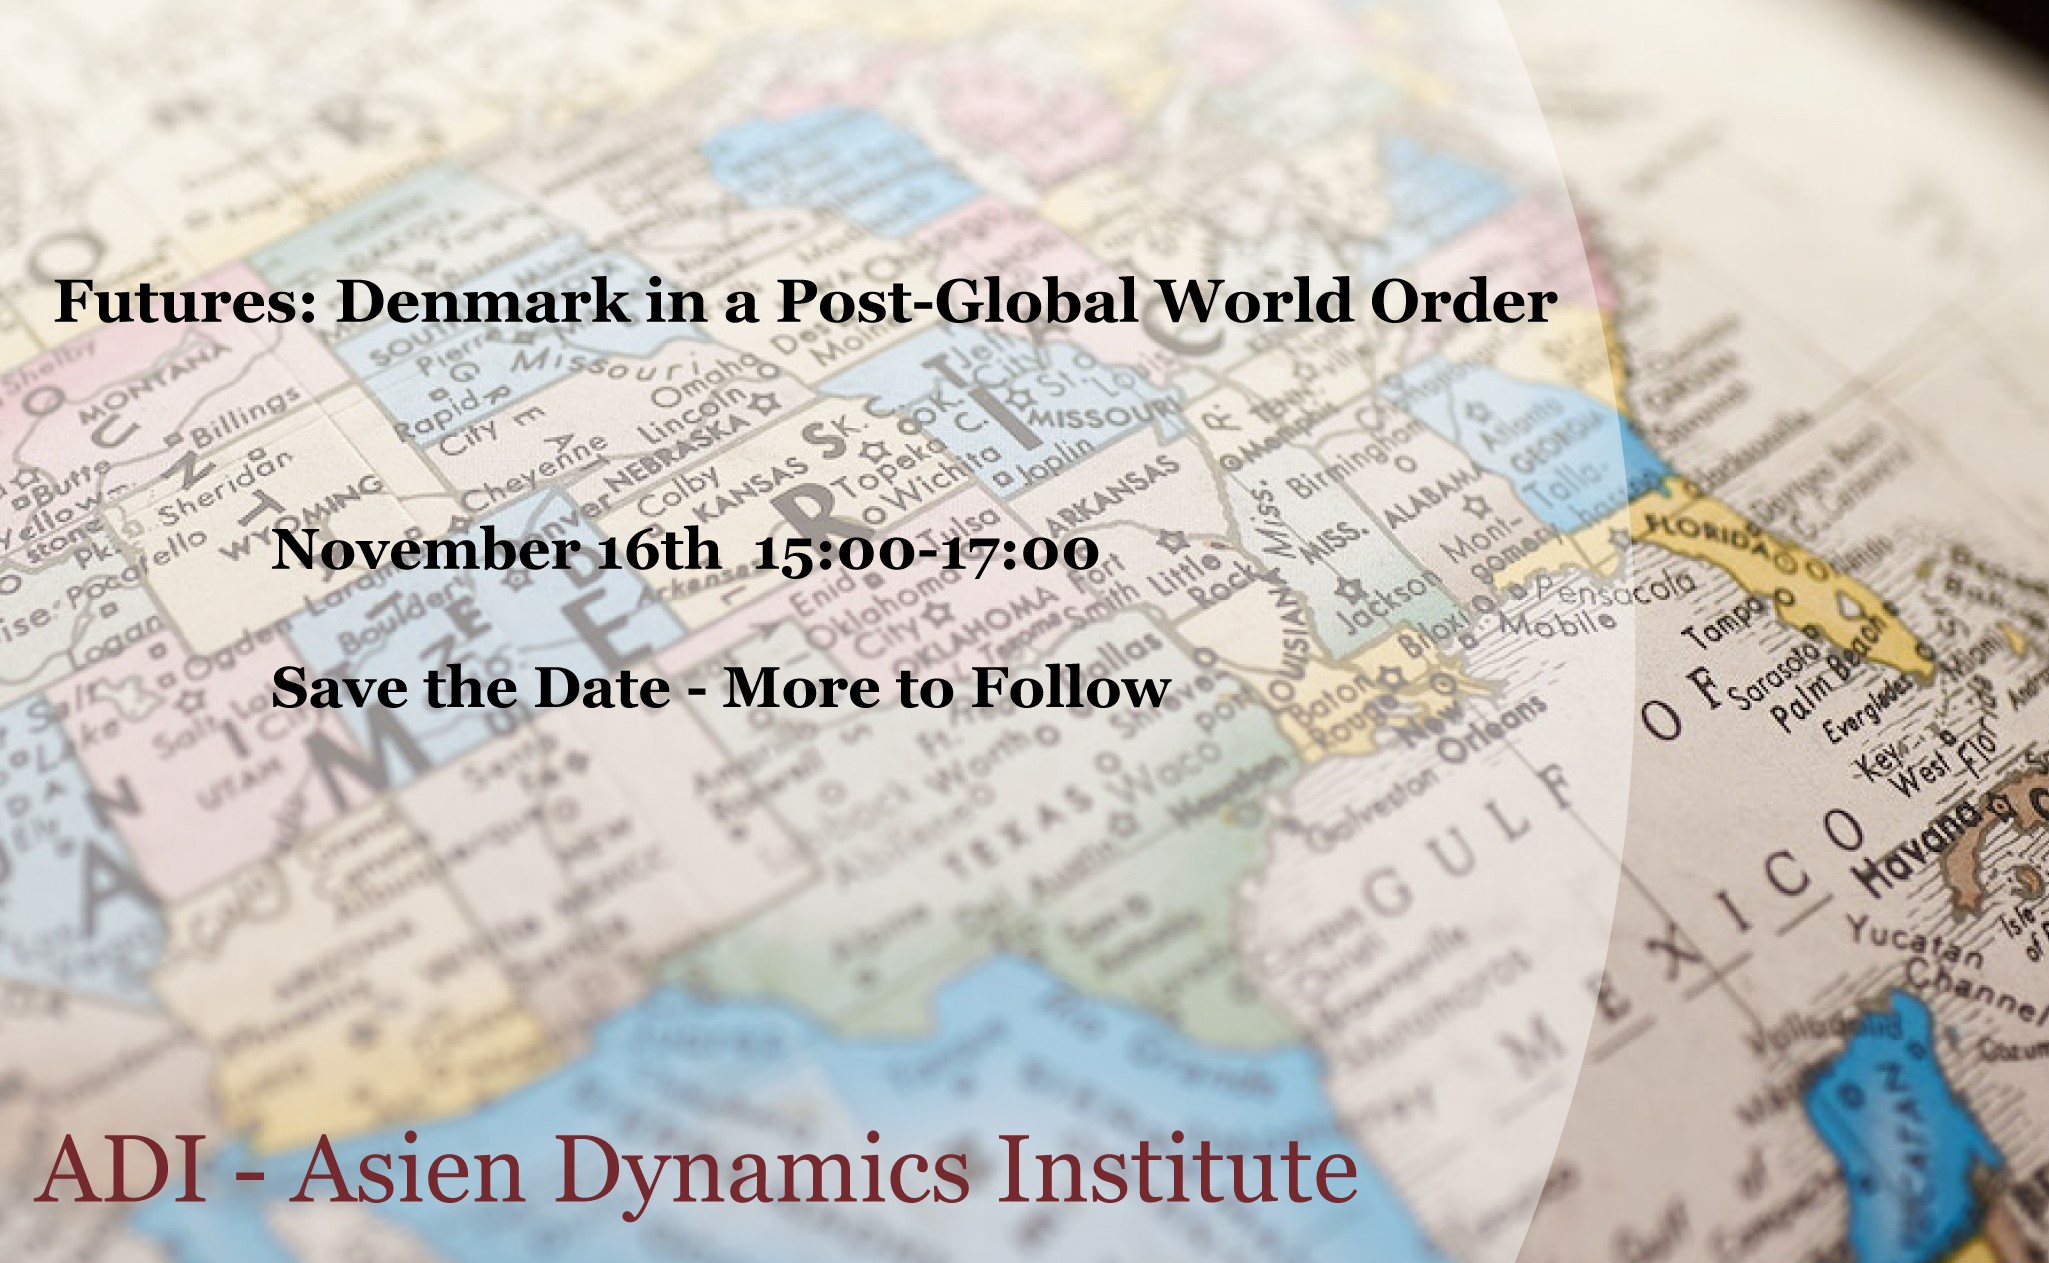  Futures: Denmark in a Post-Global World Order - Save the Date